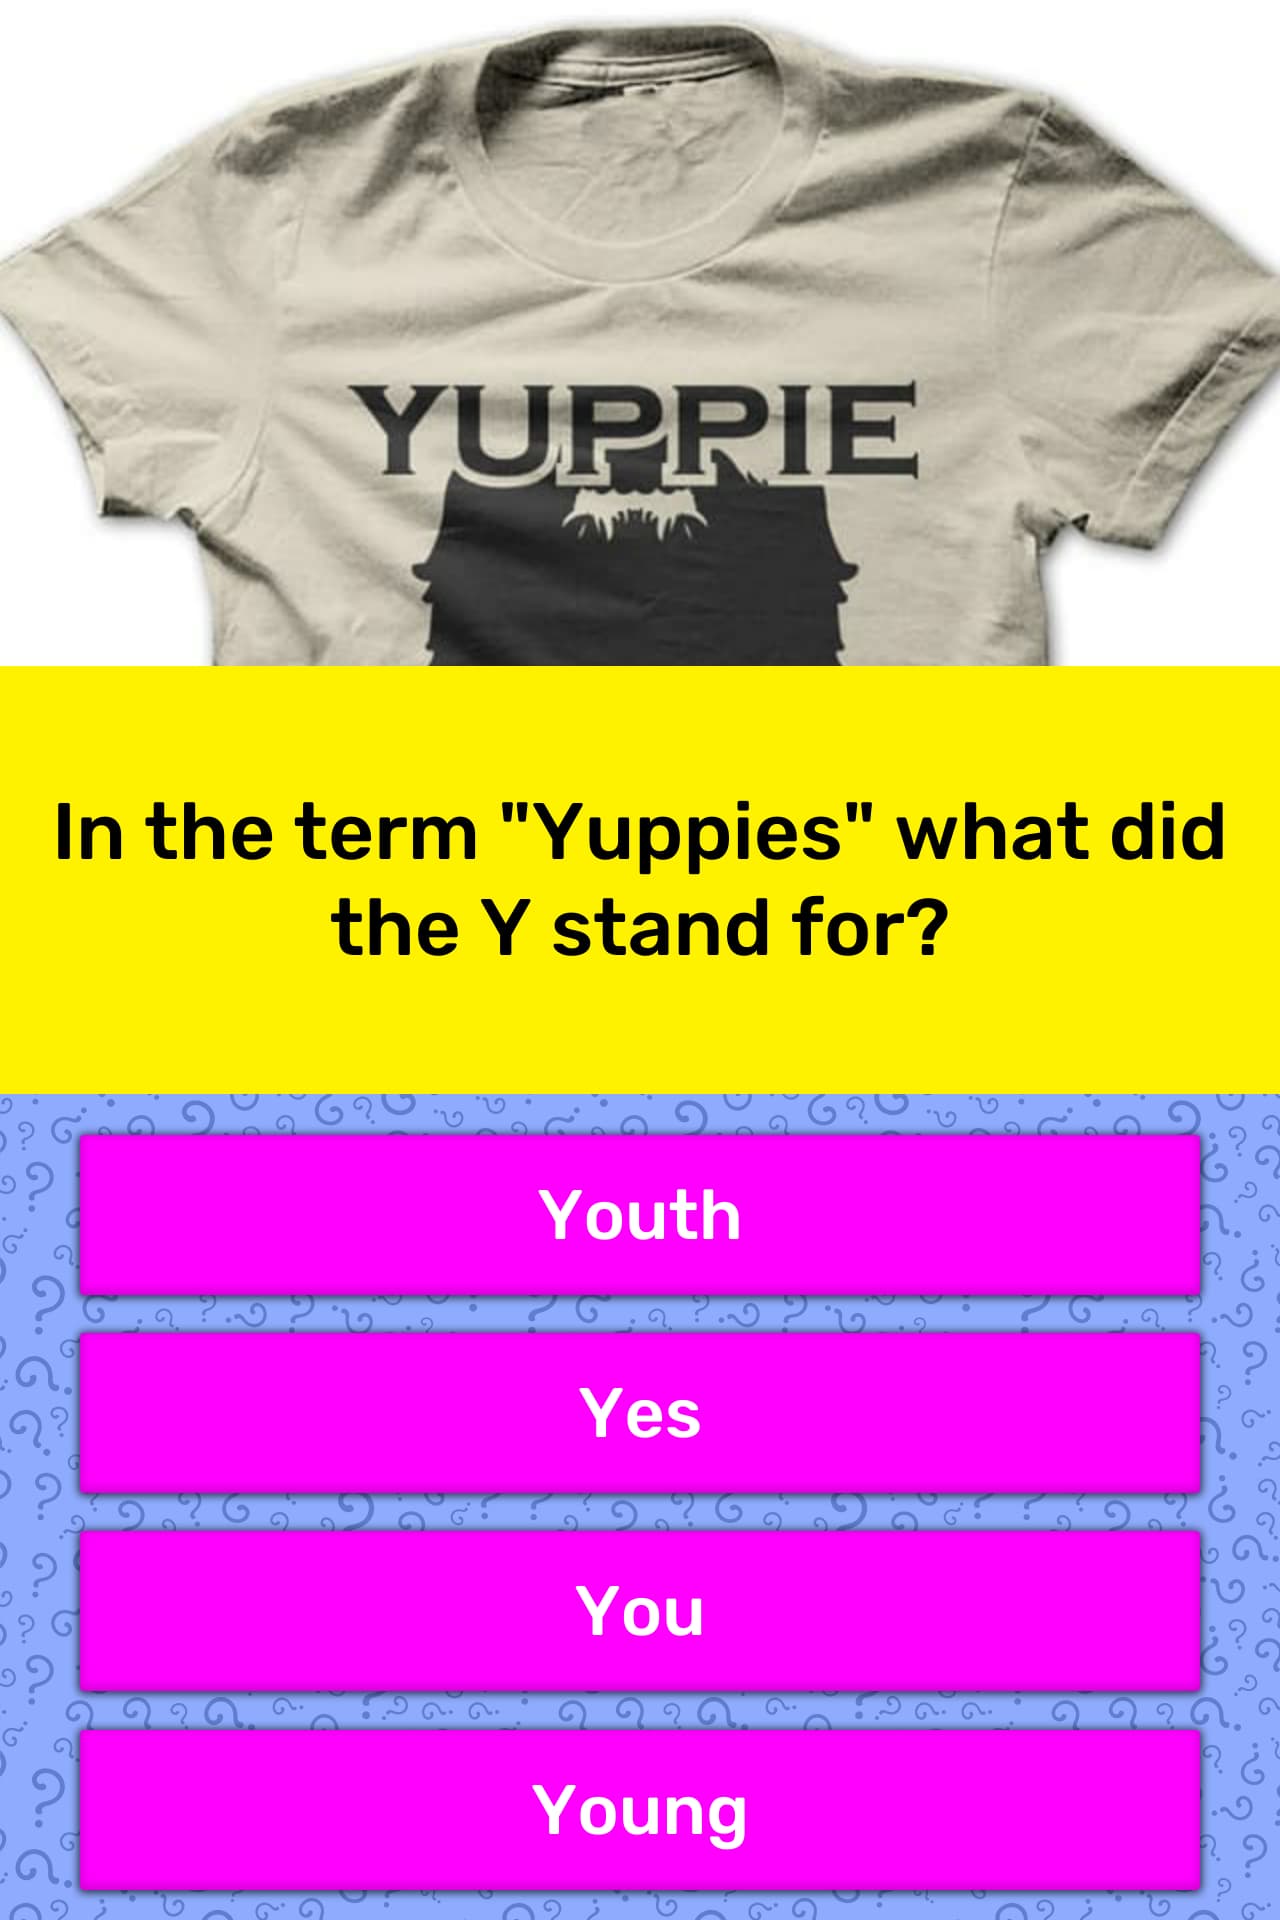 new term for yuppie - what are yuppies called now